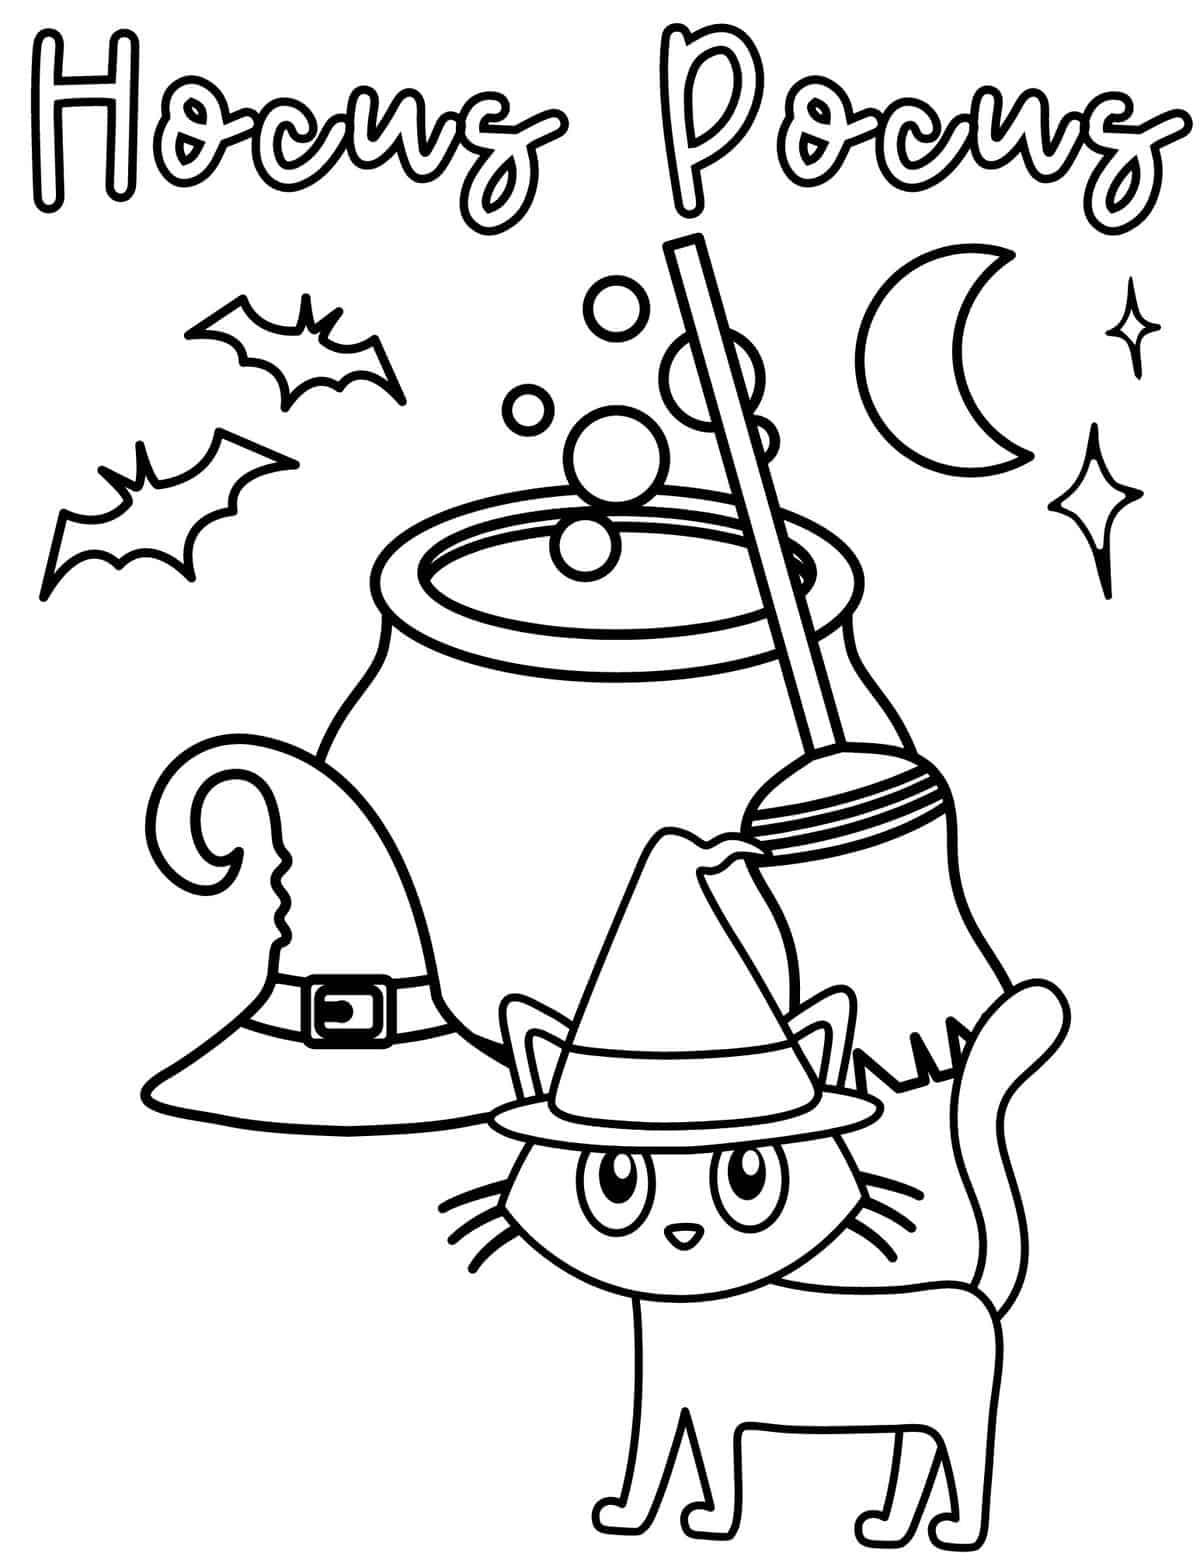 black cat next to a cauldron and witch hat coloring page